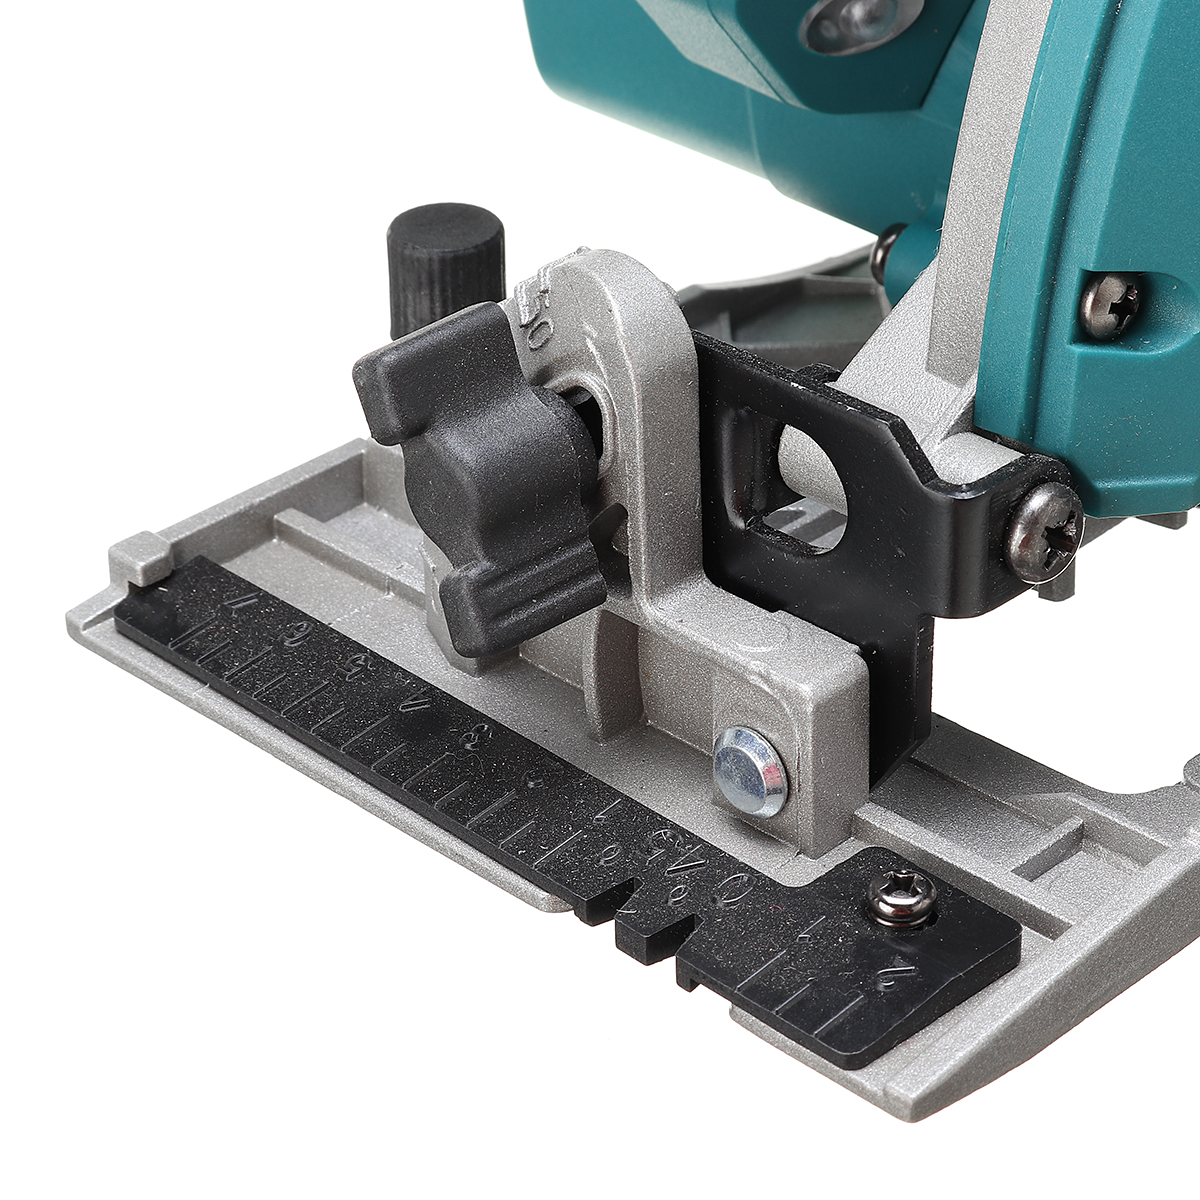 Find Electric Circular Saw Cutting Machine Handle Power Work Heavy Duty Wood Steel Cutting Tools Fit Makita 18V Battery for Sale on Gipsybee.com with cryptocurrencies